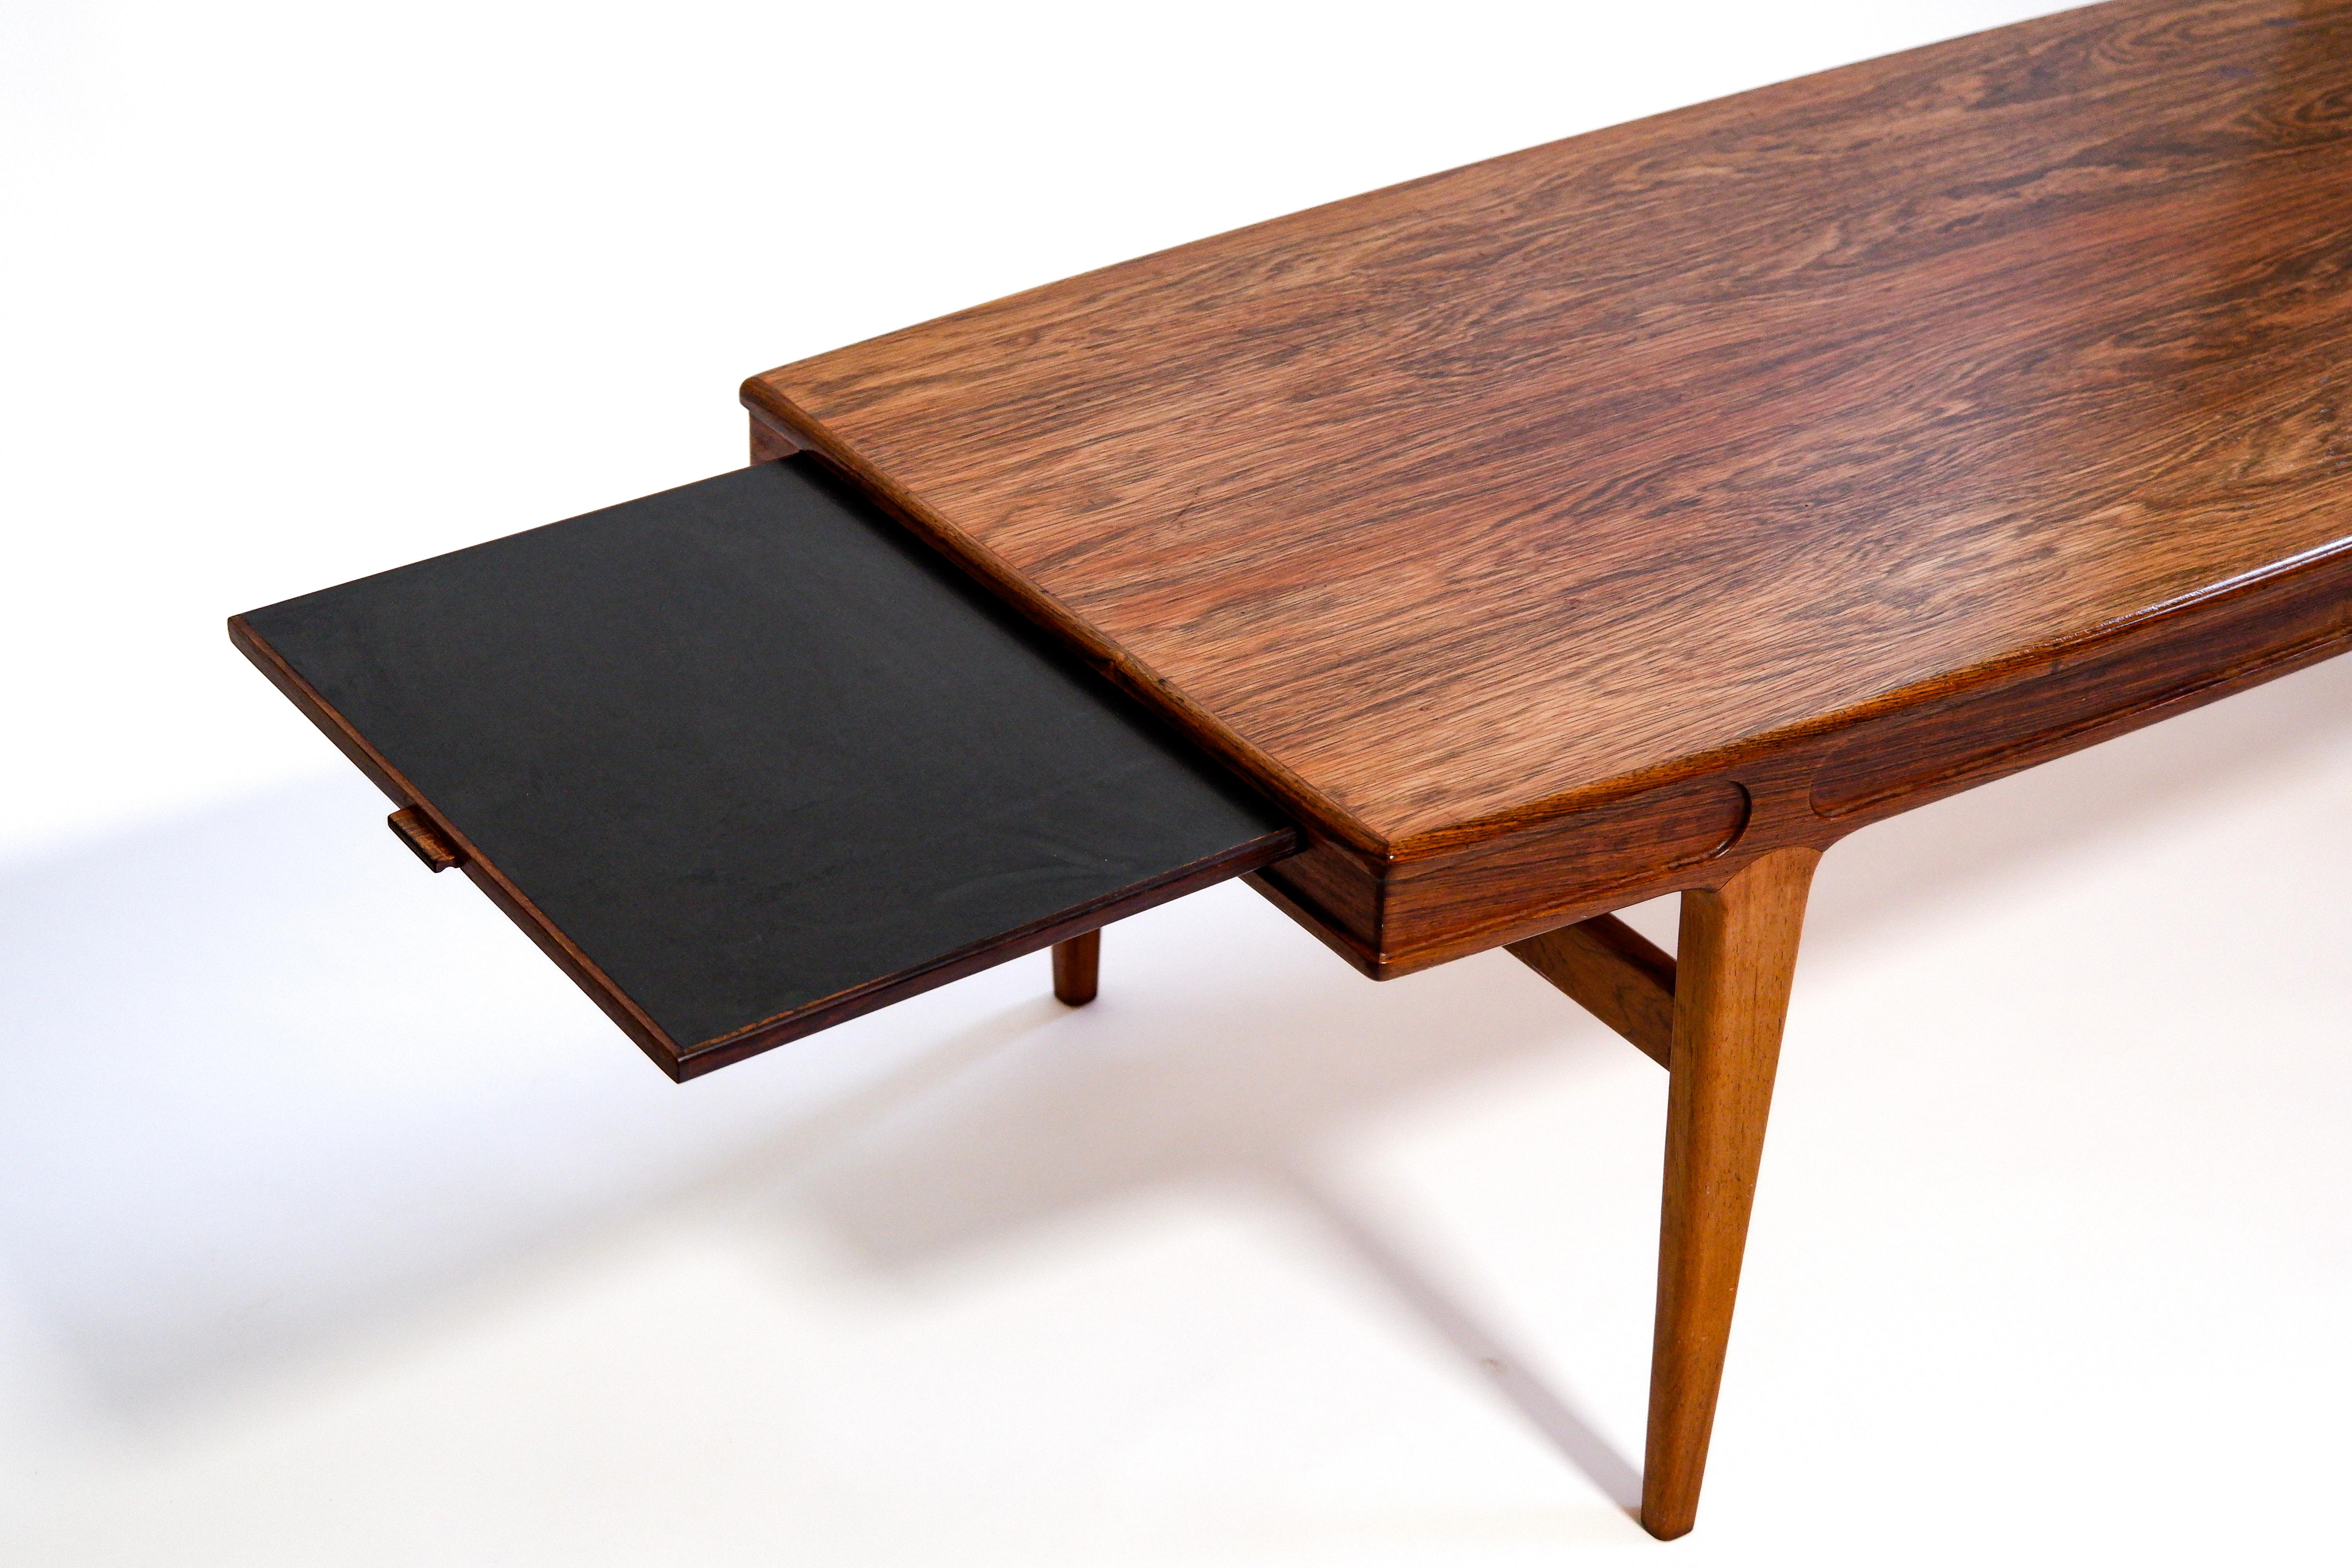 Large coffe table in beautifull brazilian wood with a double table extension that comes out on both sides of the table. Both extension are 33 cm each. The table has been designed by Johannes Andersen in danemark and produced in the 60's. The wood is